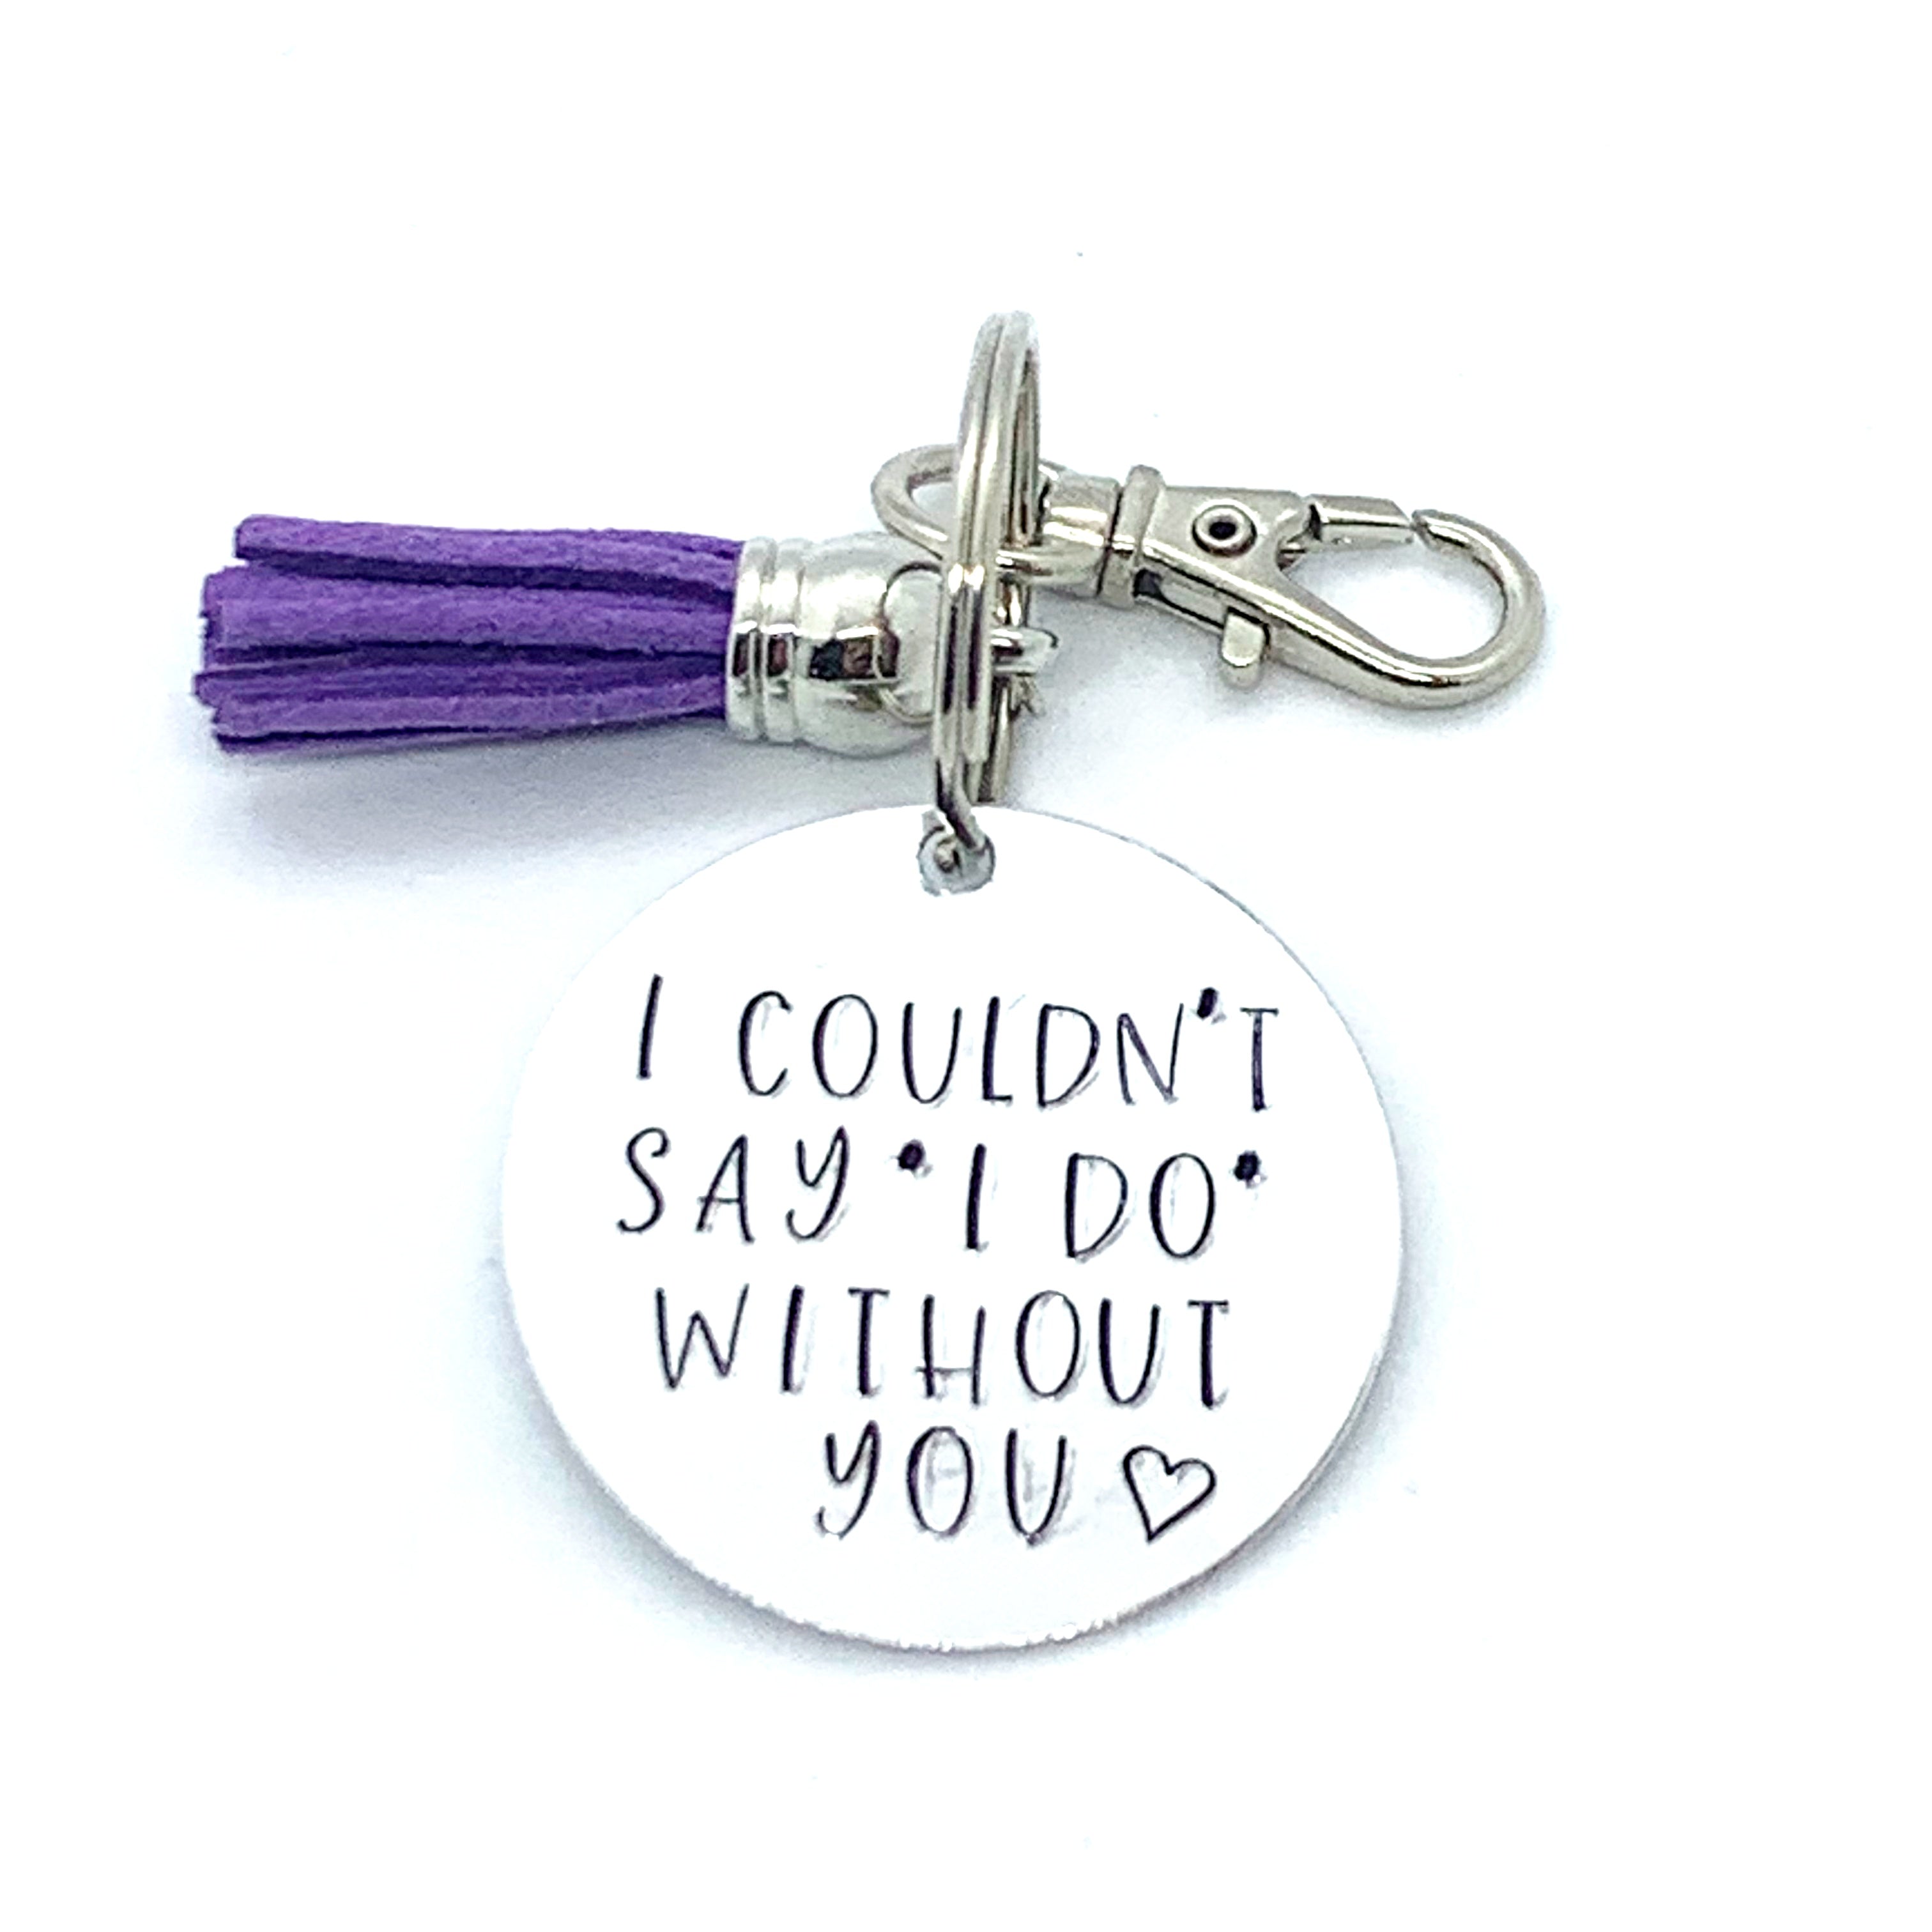 Key Chain - Circle Shape - I Couldn't Say "I DO" Without You - (bridesmaid gift)